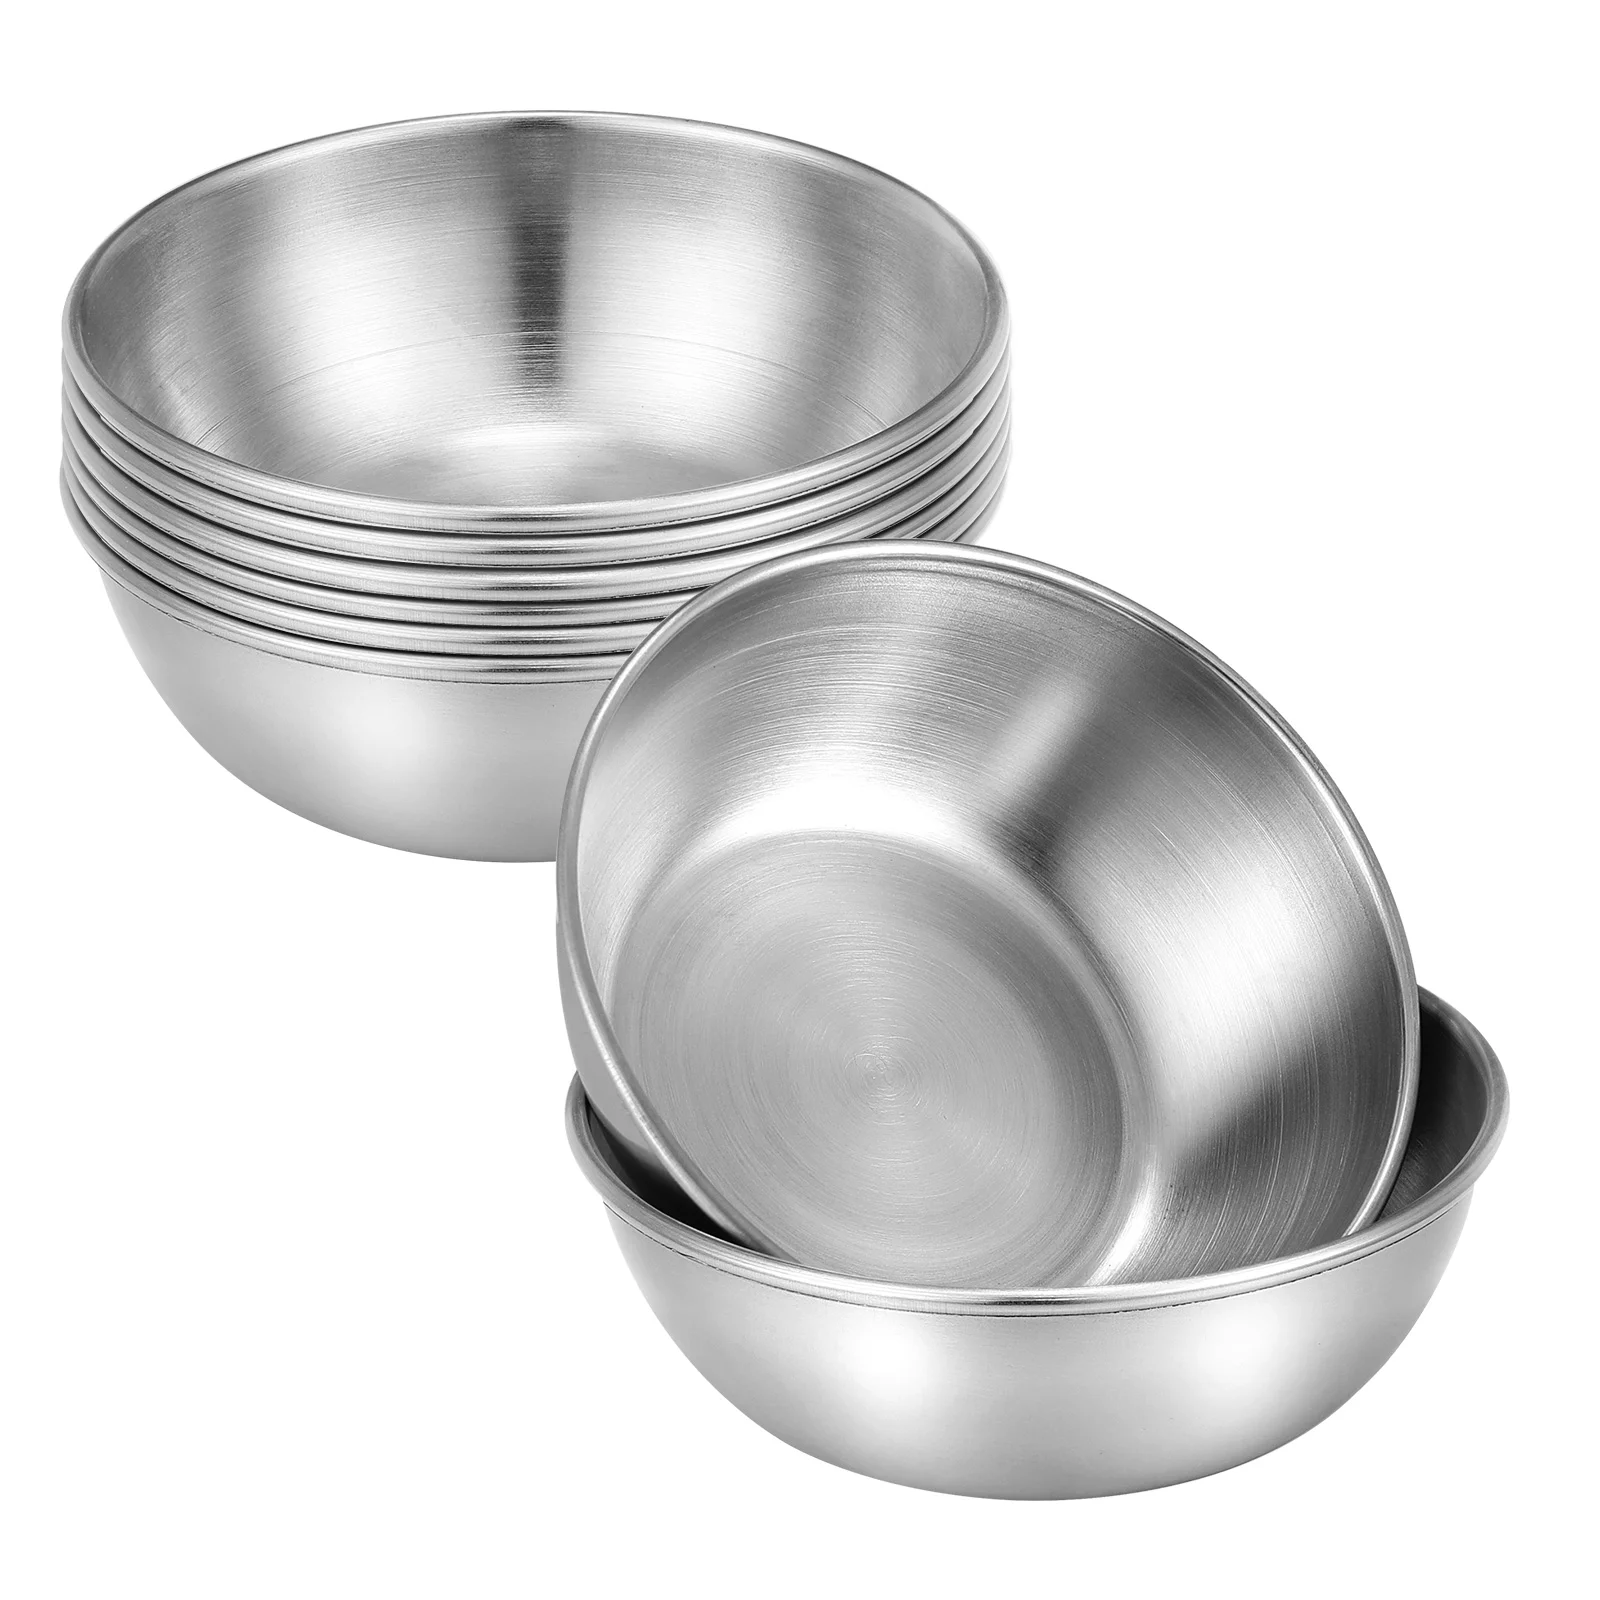 

Bowls Seasoning Sauce Dipping Dishes Bowl Cupssteel Stainless Dish Set Condiment Appetizer Mini Serving Plates Sushi Pudding